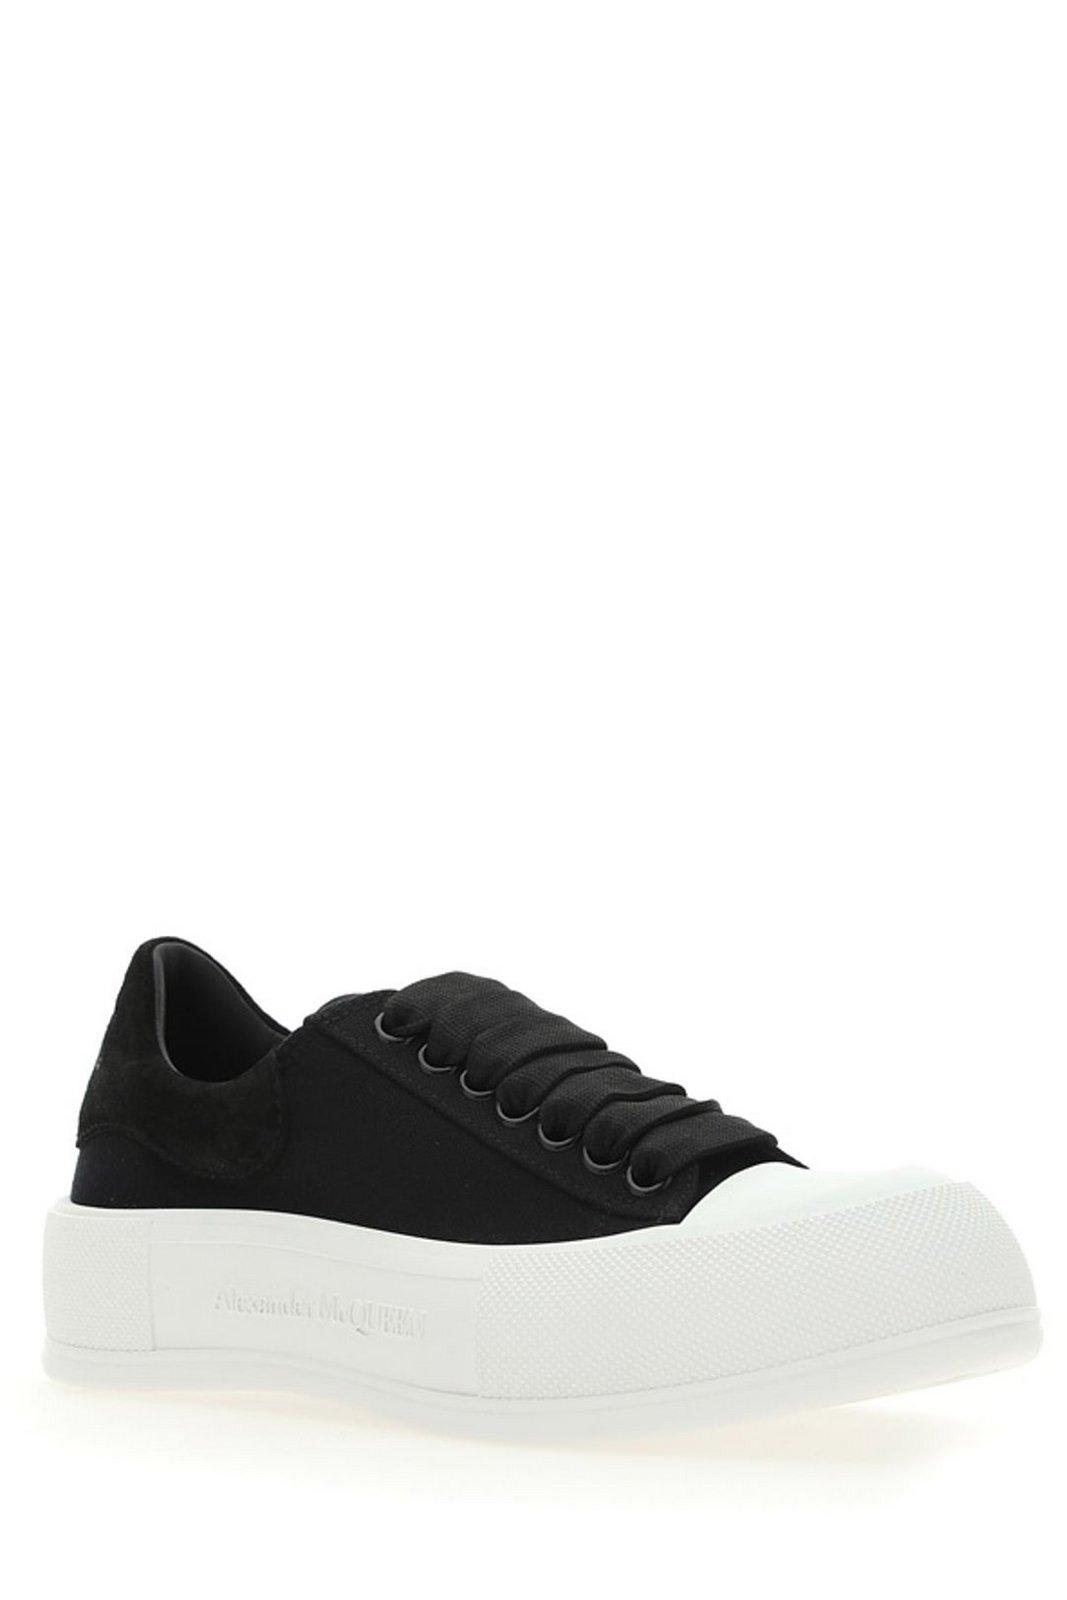 Alexander McQueen Lace-up Round-toe Sneakers